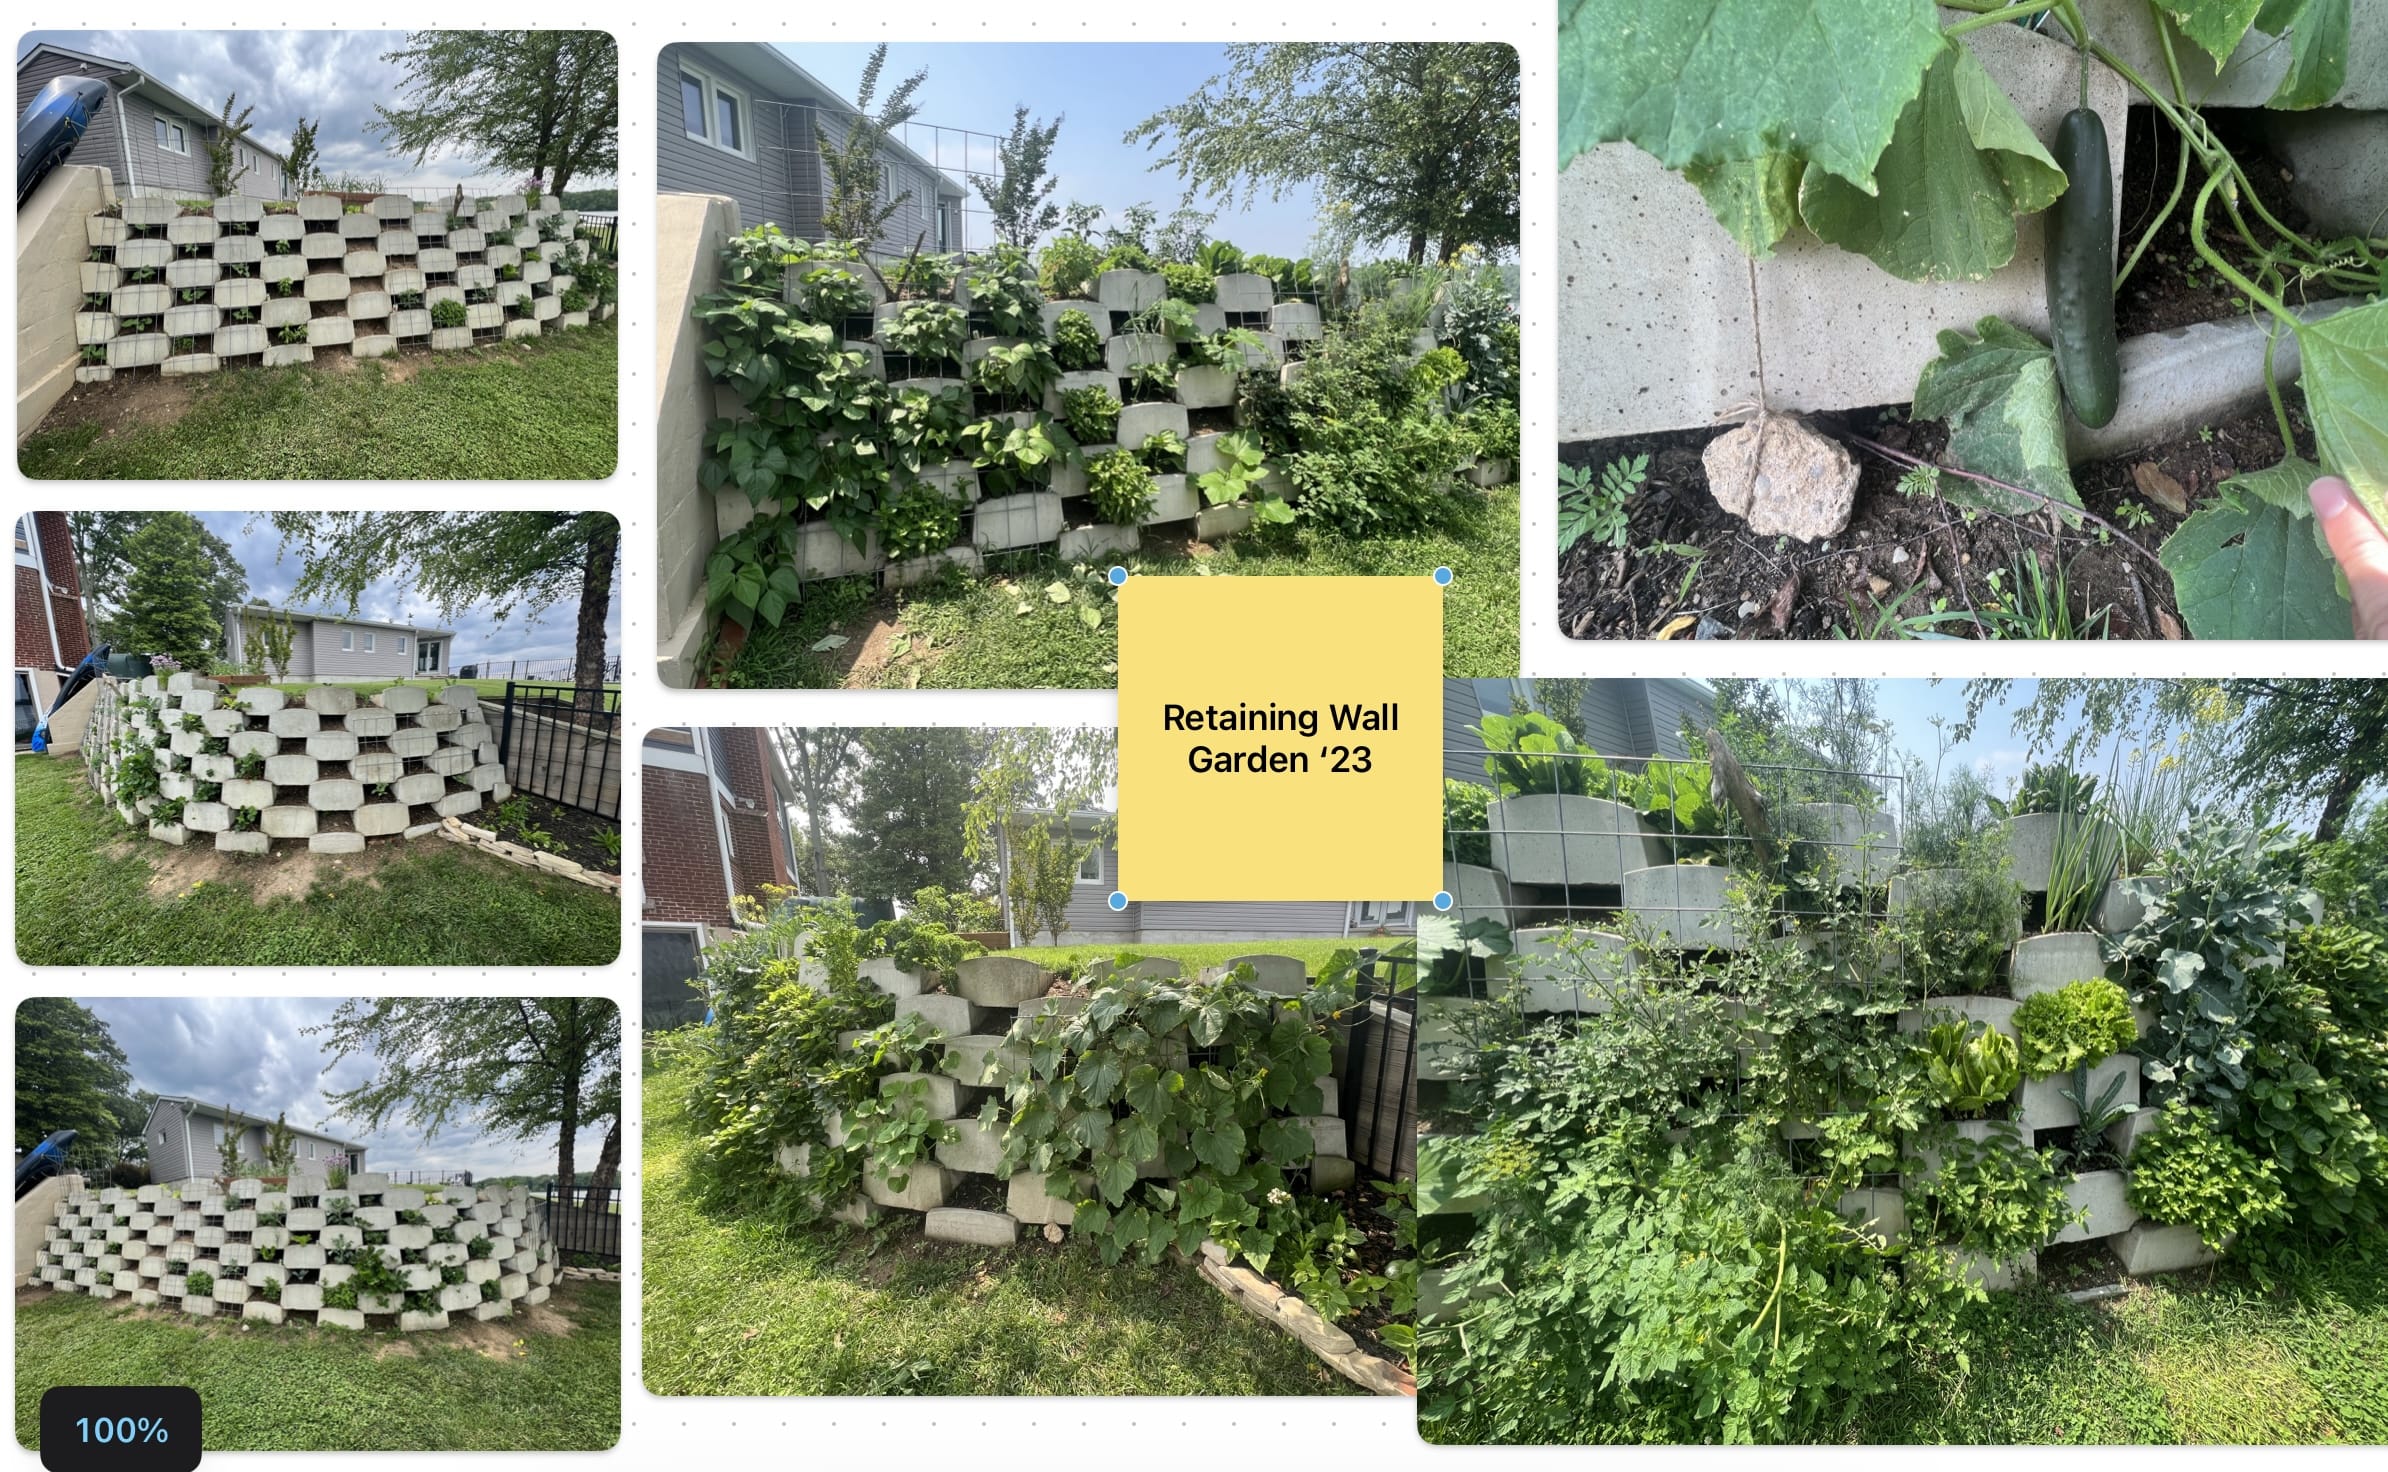 Retaining Wall Garden picture collage